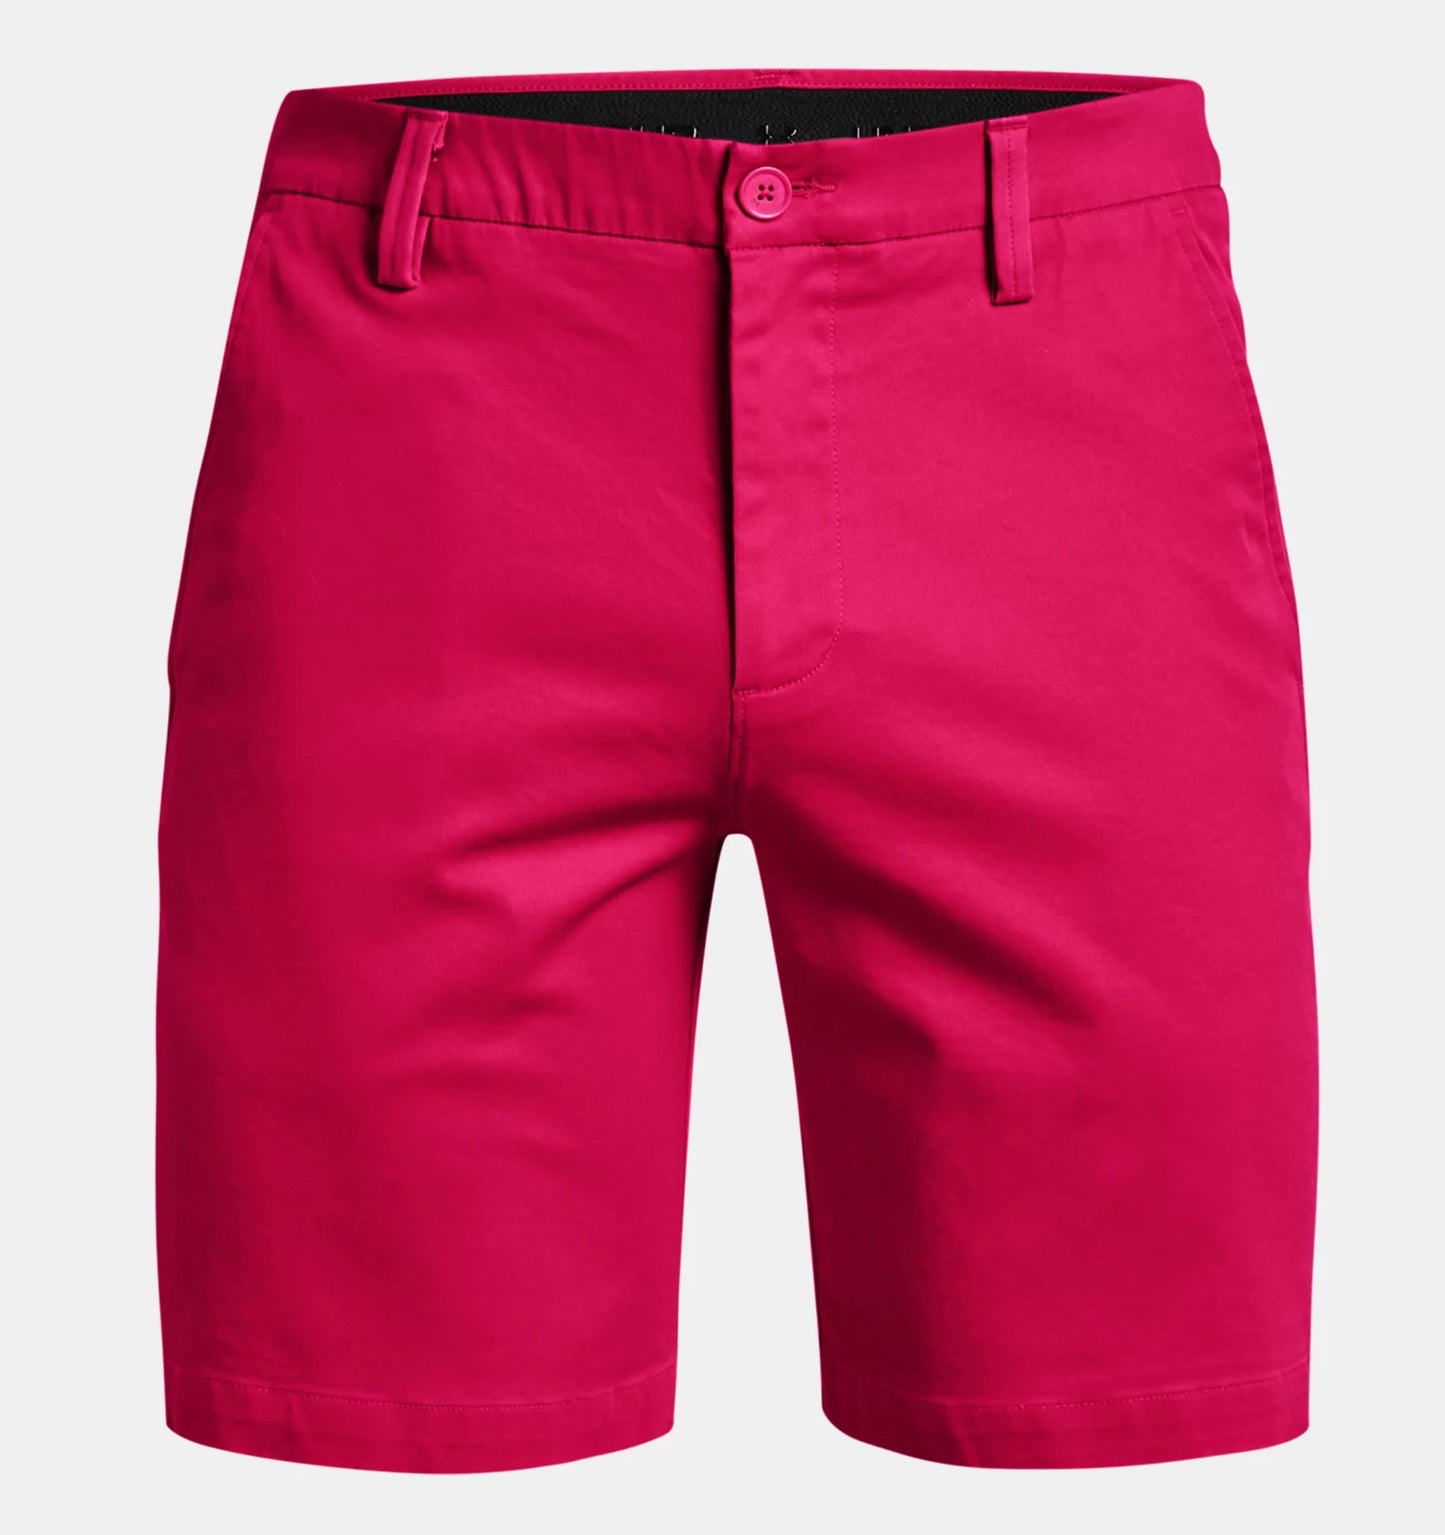 Under Armour Men's Chino Shorts Knock Out Red